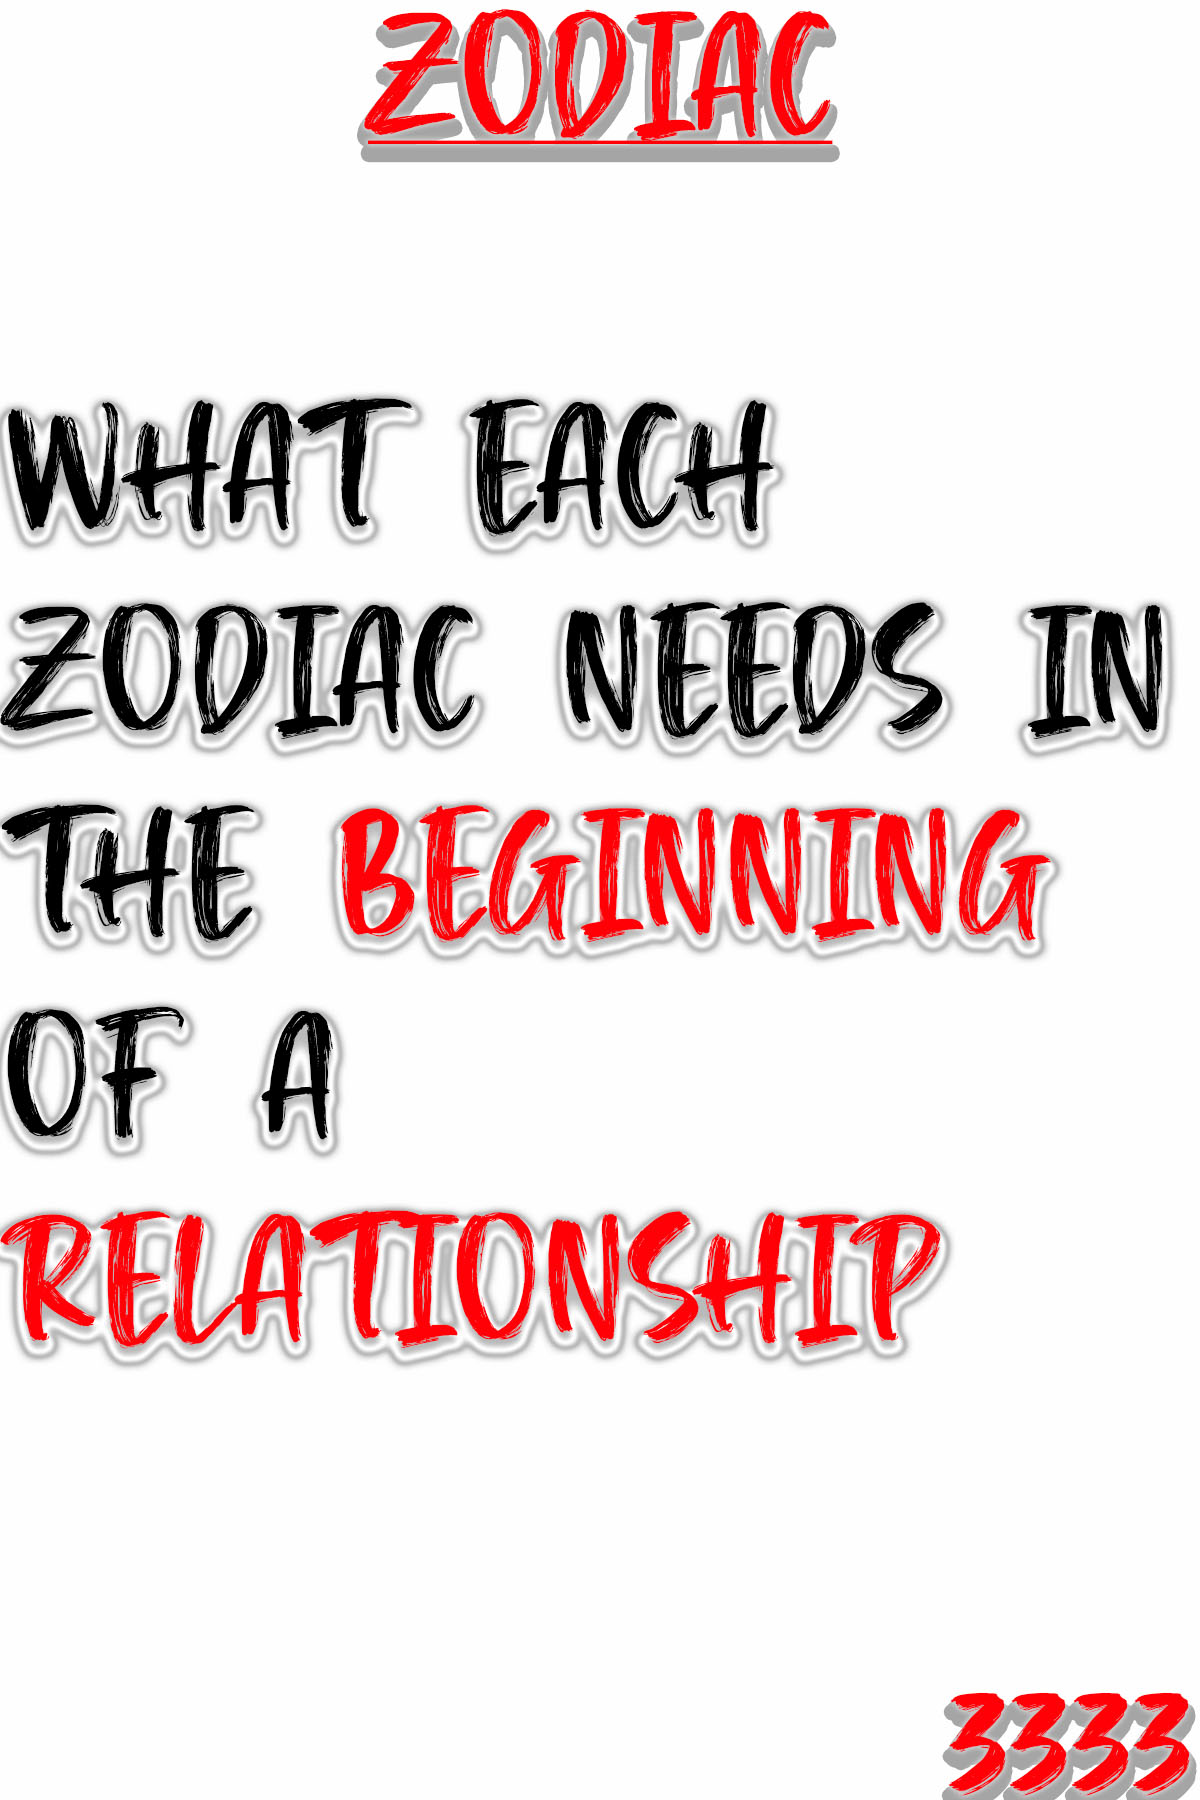 What Each Zodiac Needs In The Beginning Of A Relationship